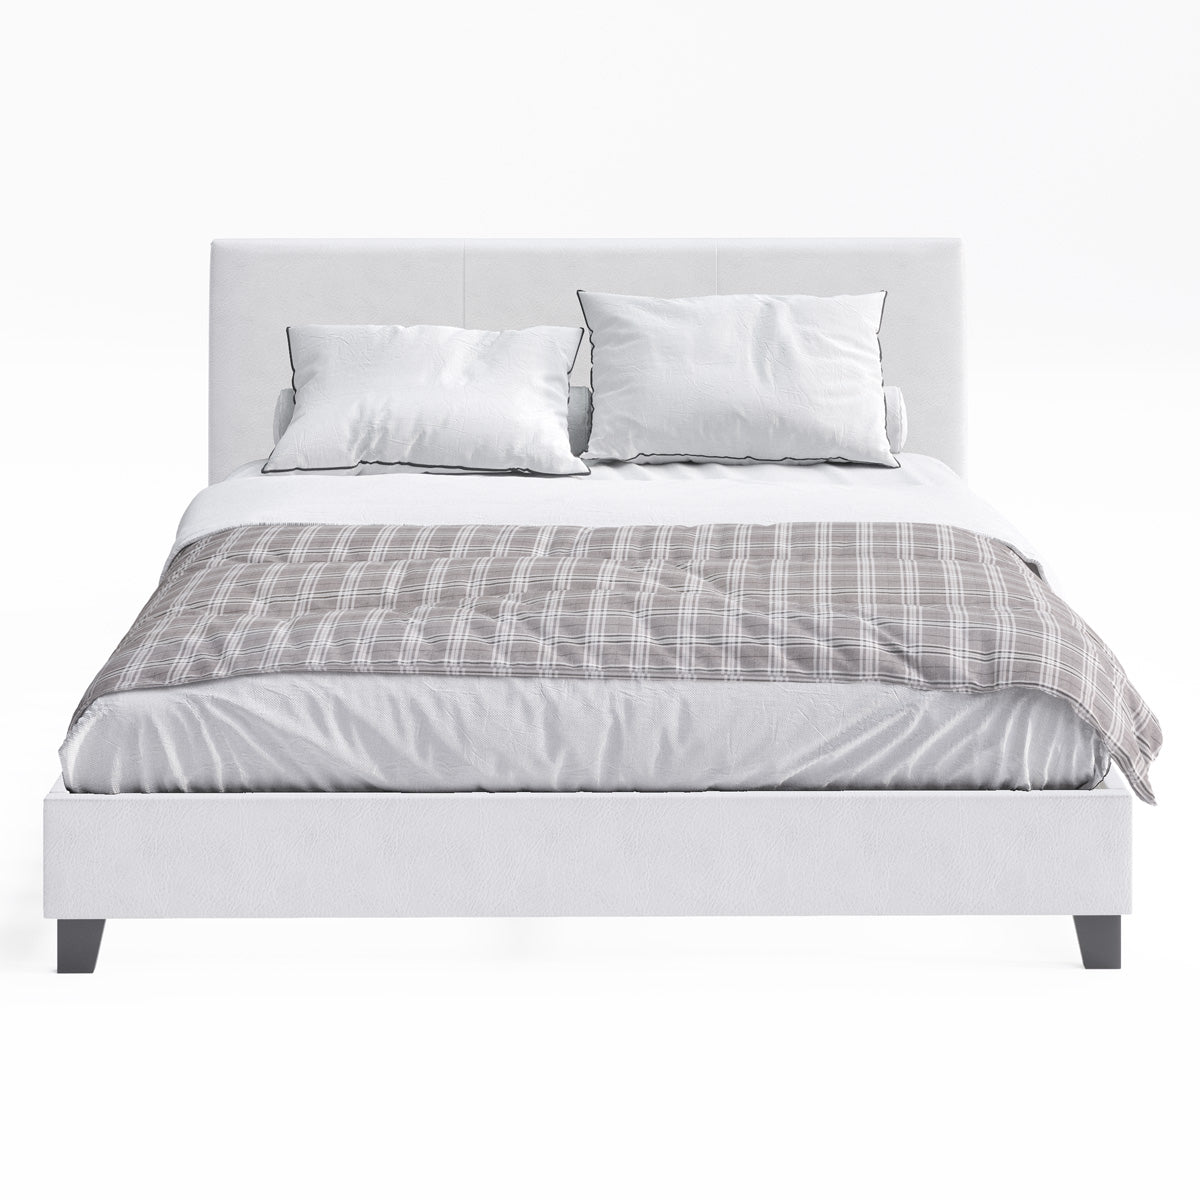 Arthur PU Leather Bed Frame (White)